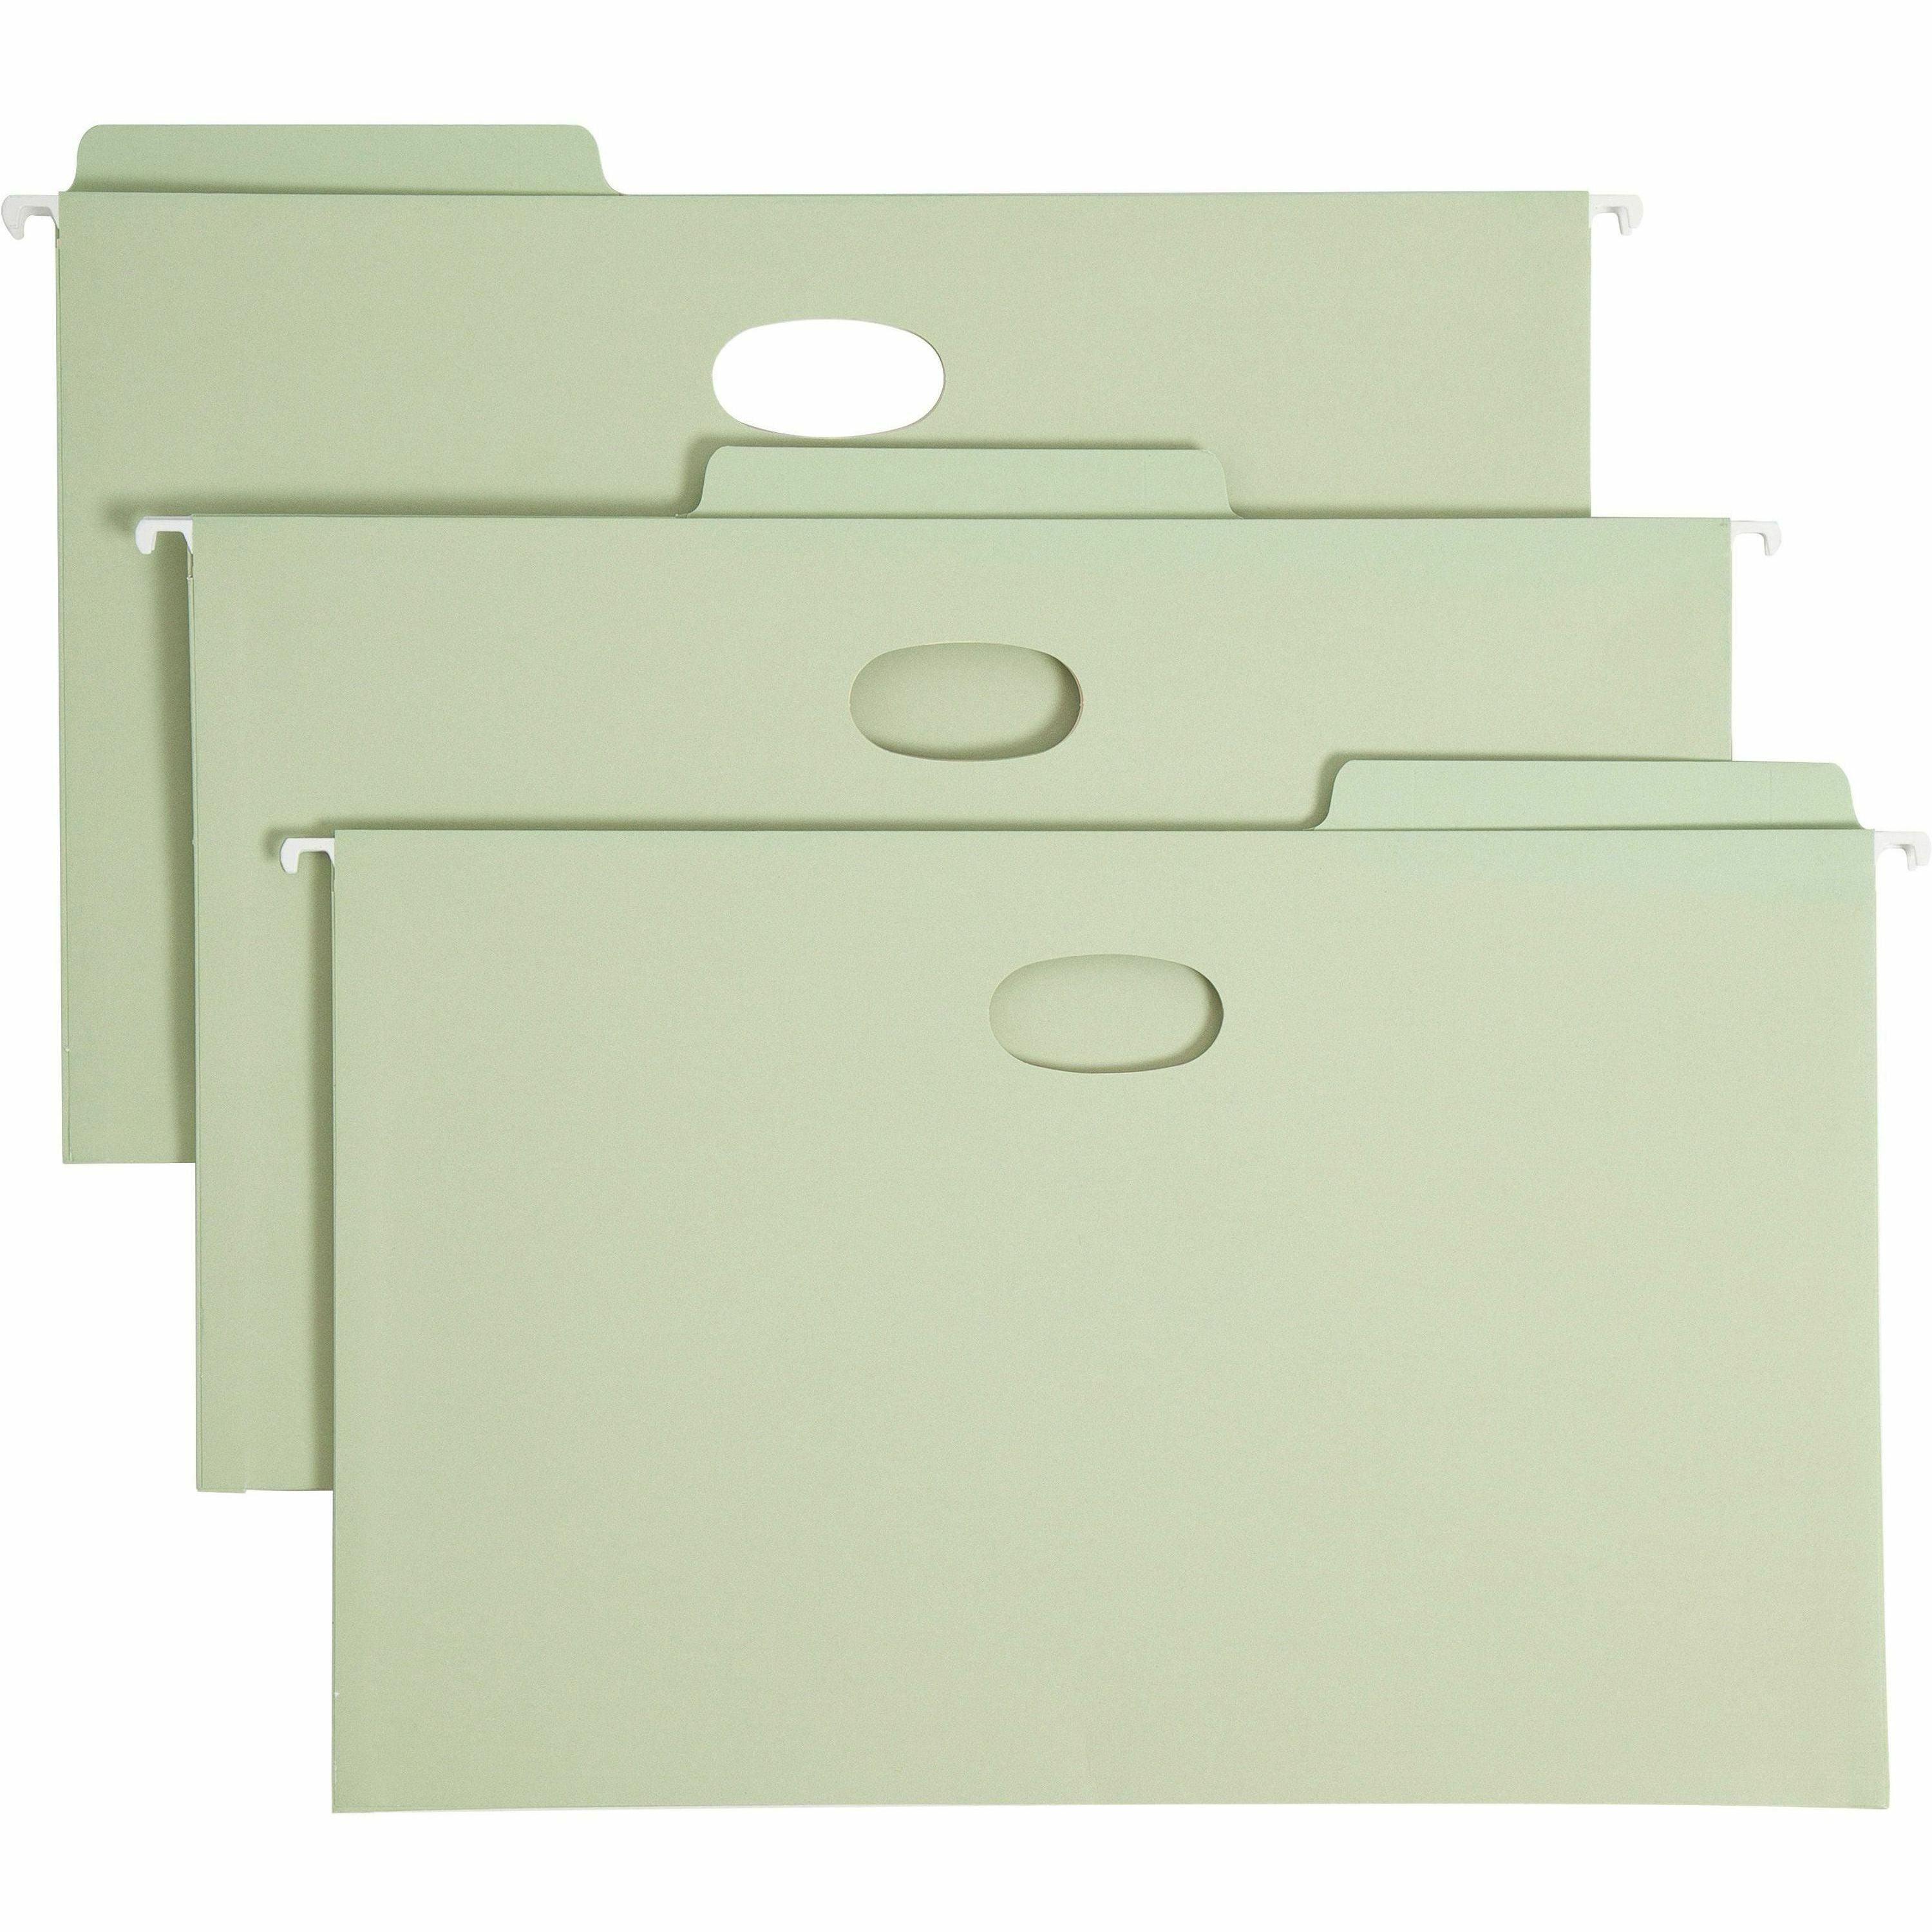 Smead FasTab 1/3 Tab Cut Legal Recycled Hanging Folder - 8 1/2" x 14" - 5 1/4" Expansion - Top Tab Location - Assorted Position Tab Position - Moss - 10% Recycled - 9 / Box - 